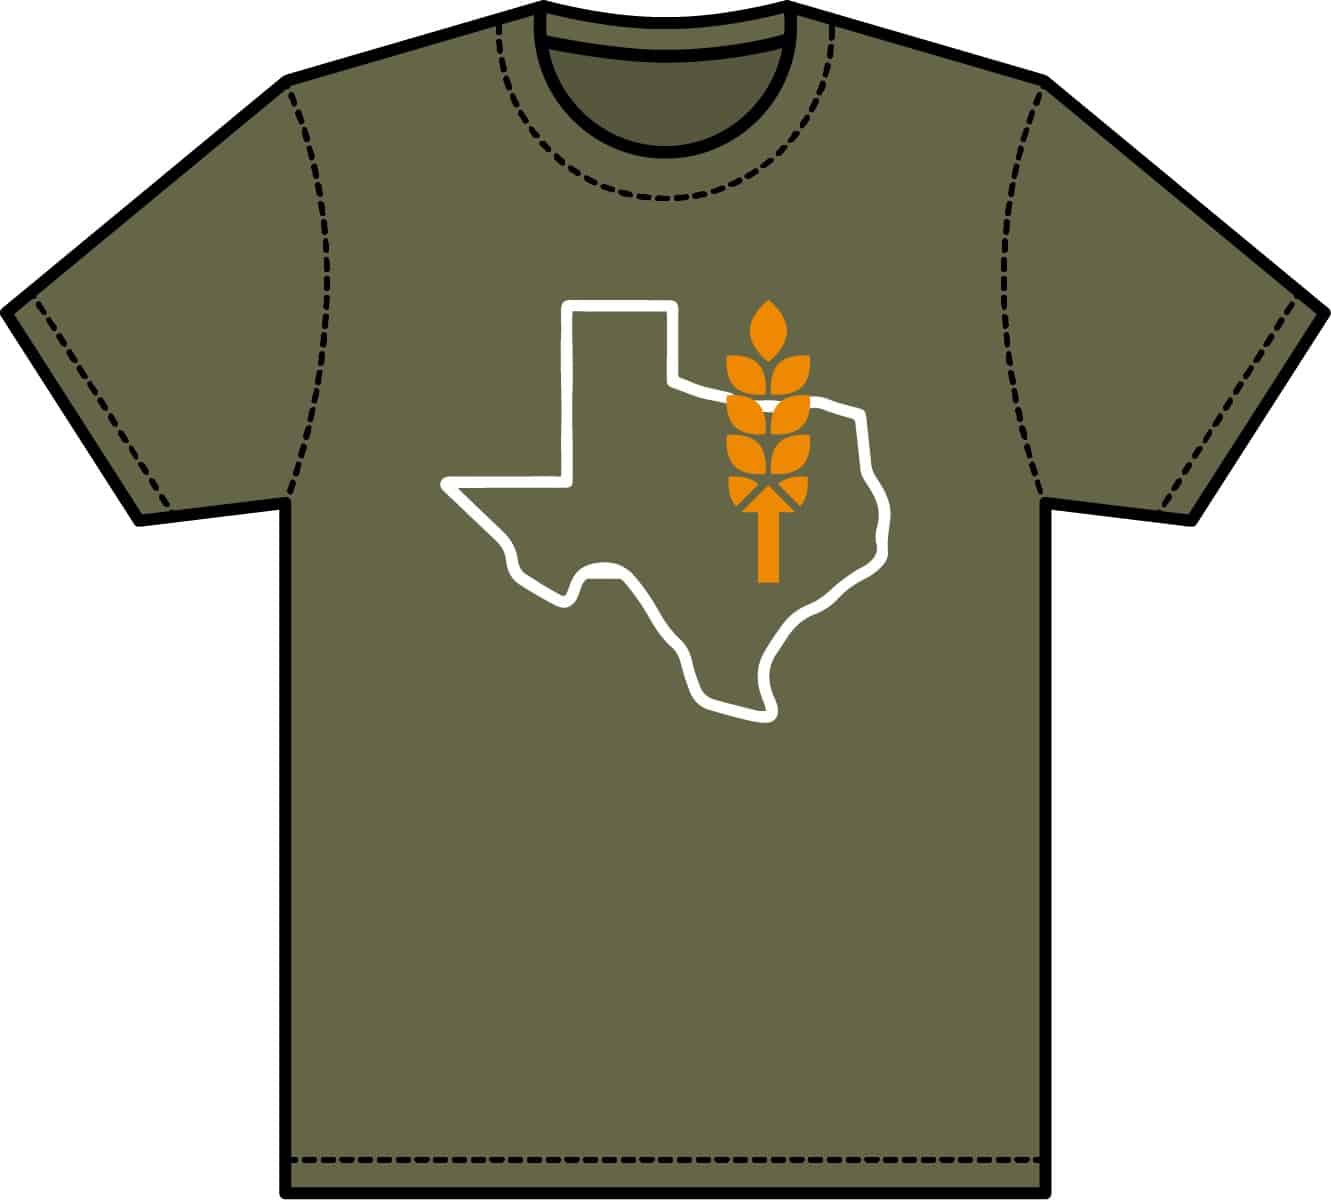 TX Outline with Wheat T-Shirt